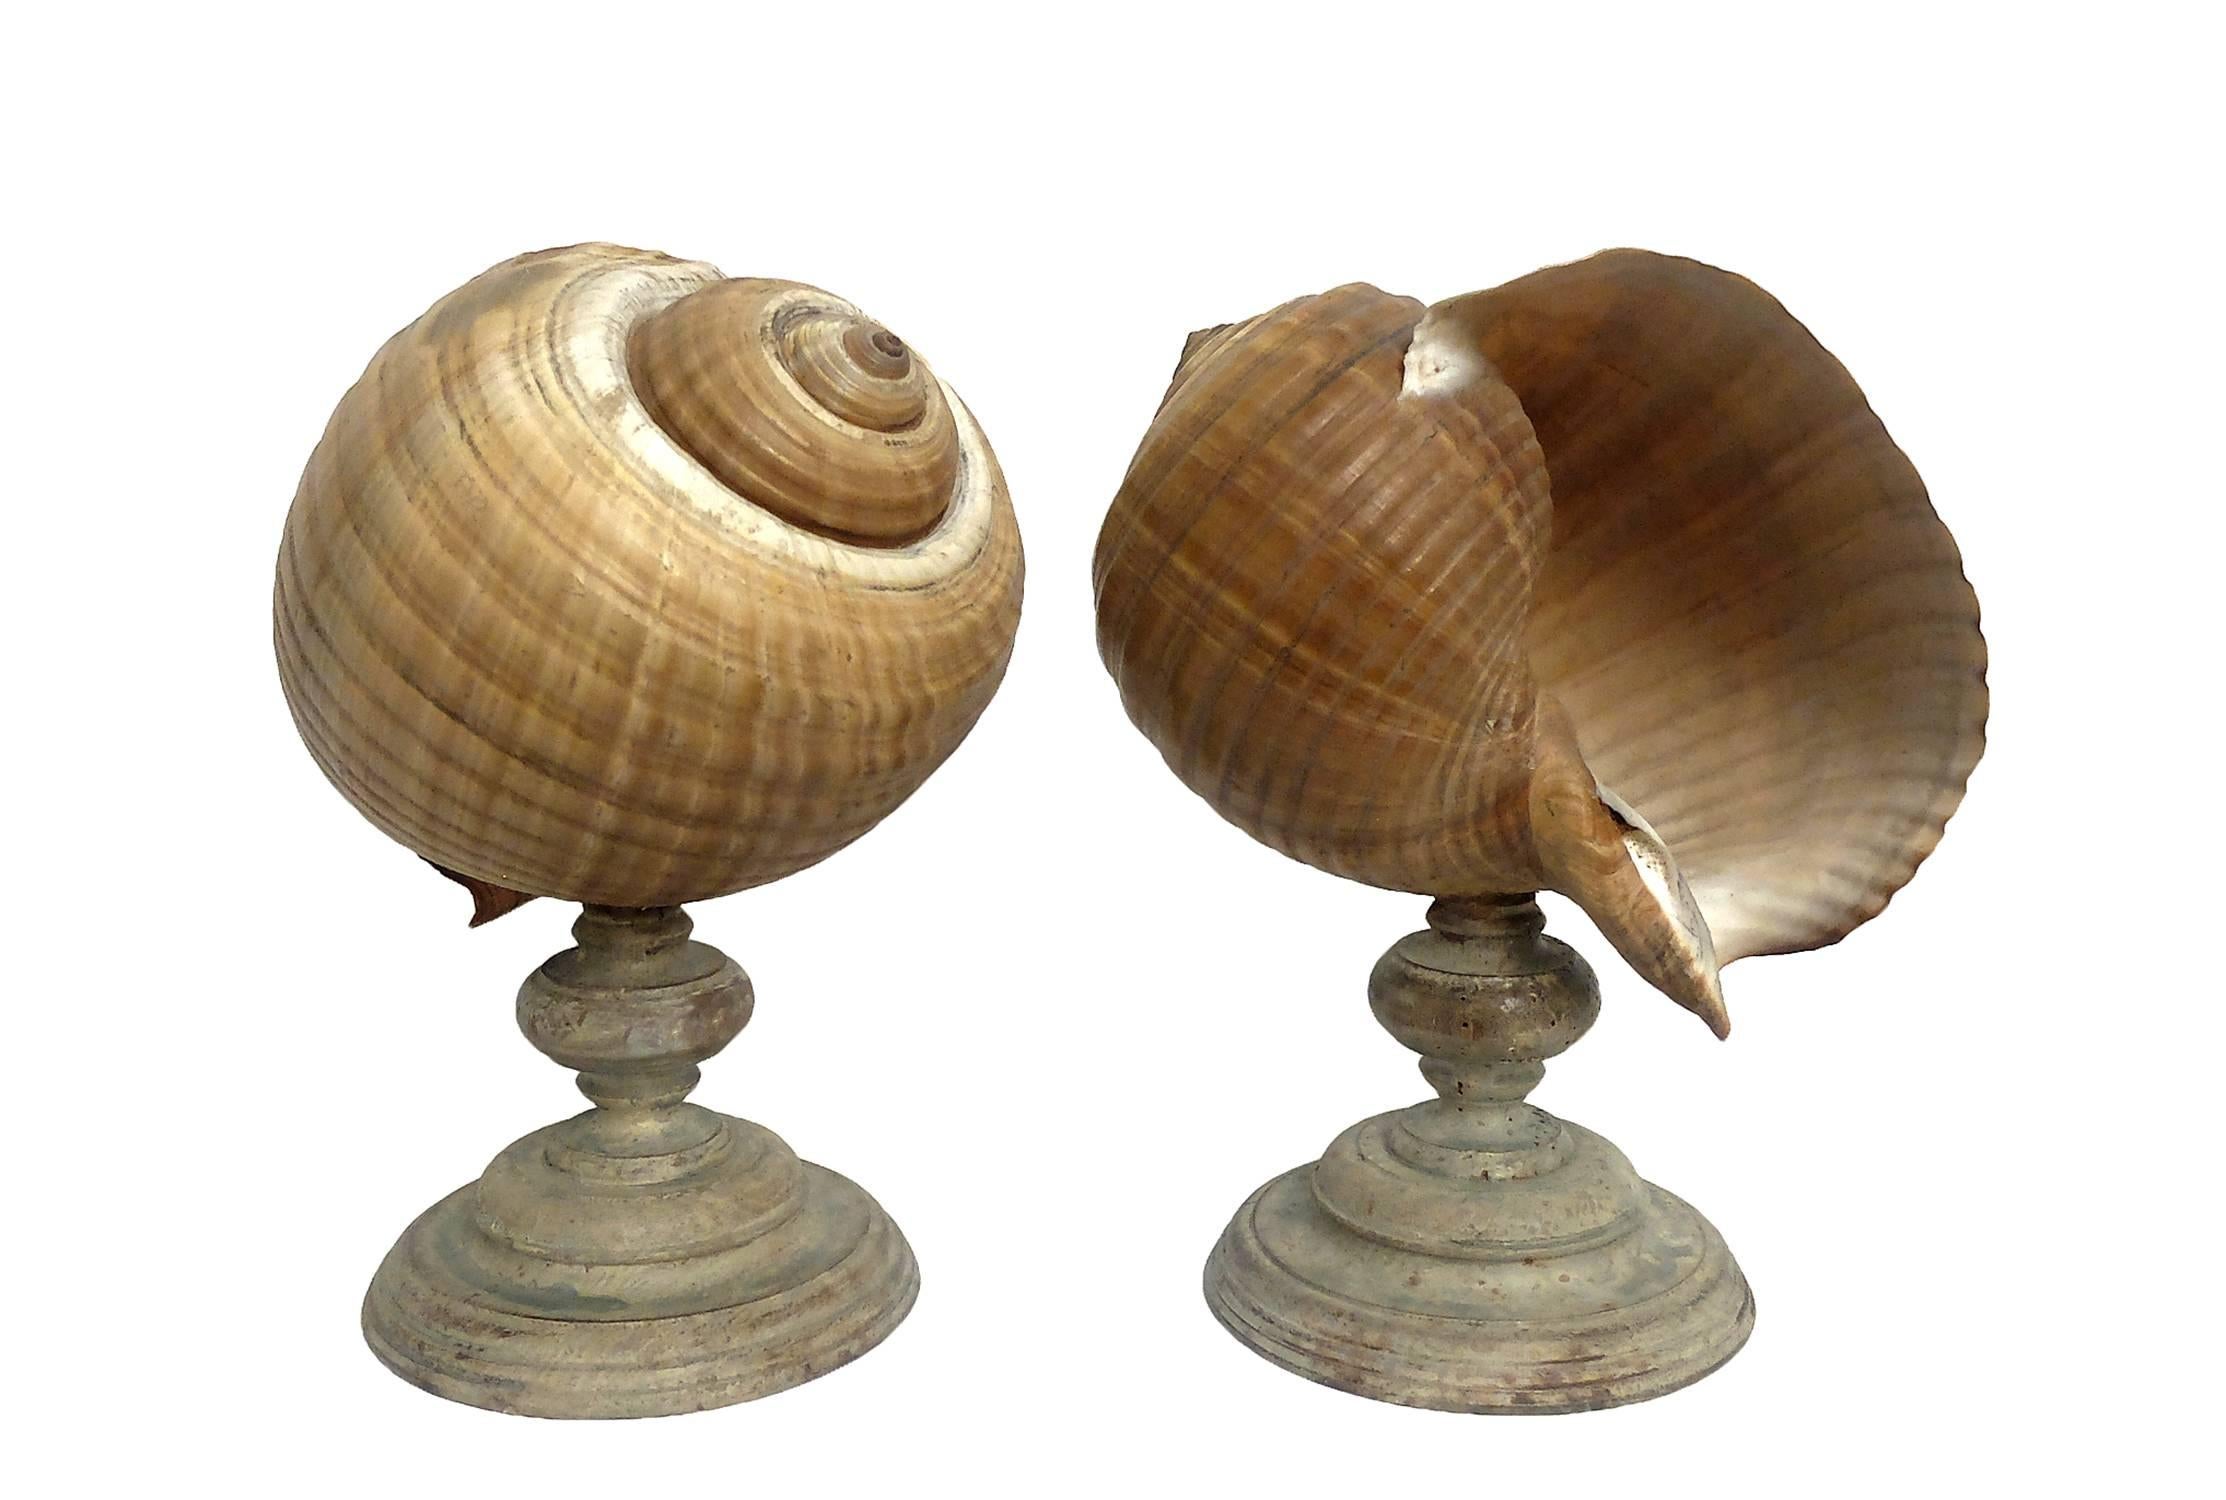 The earlier plint is made out of carved wood over the base, an example of a giant Tun shells Tonna Galéa, Italy, circa 1880. The price is intended for both the pieces.